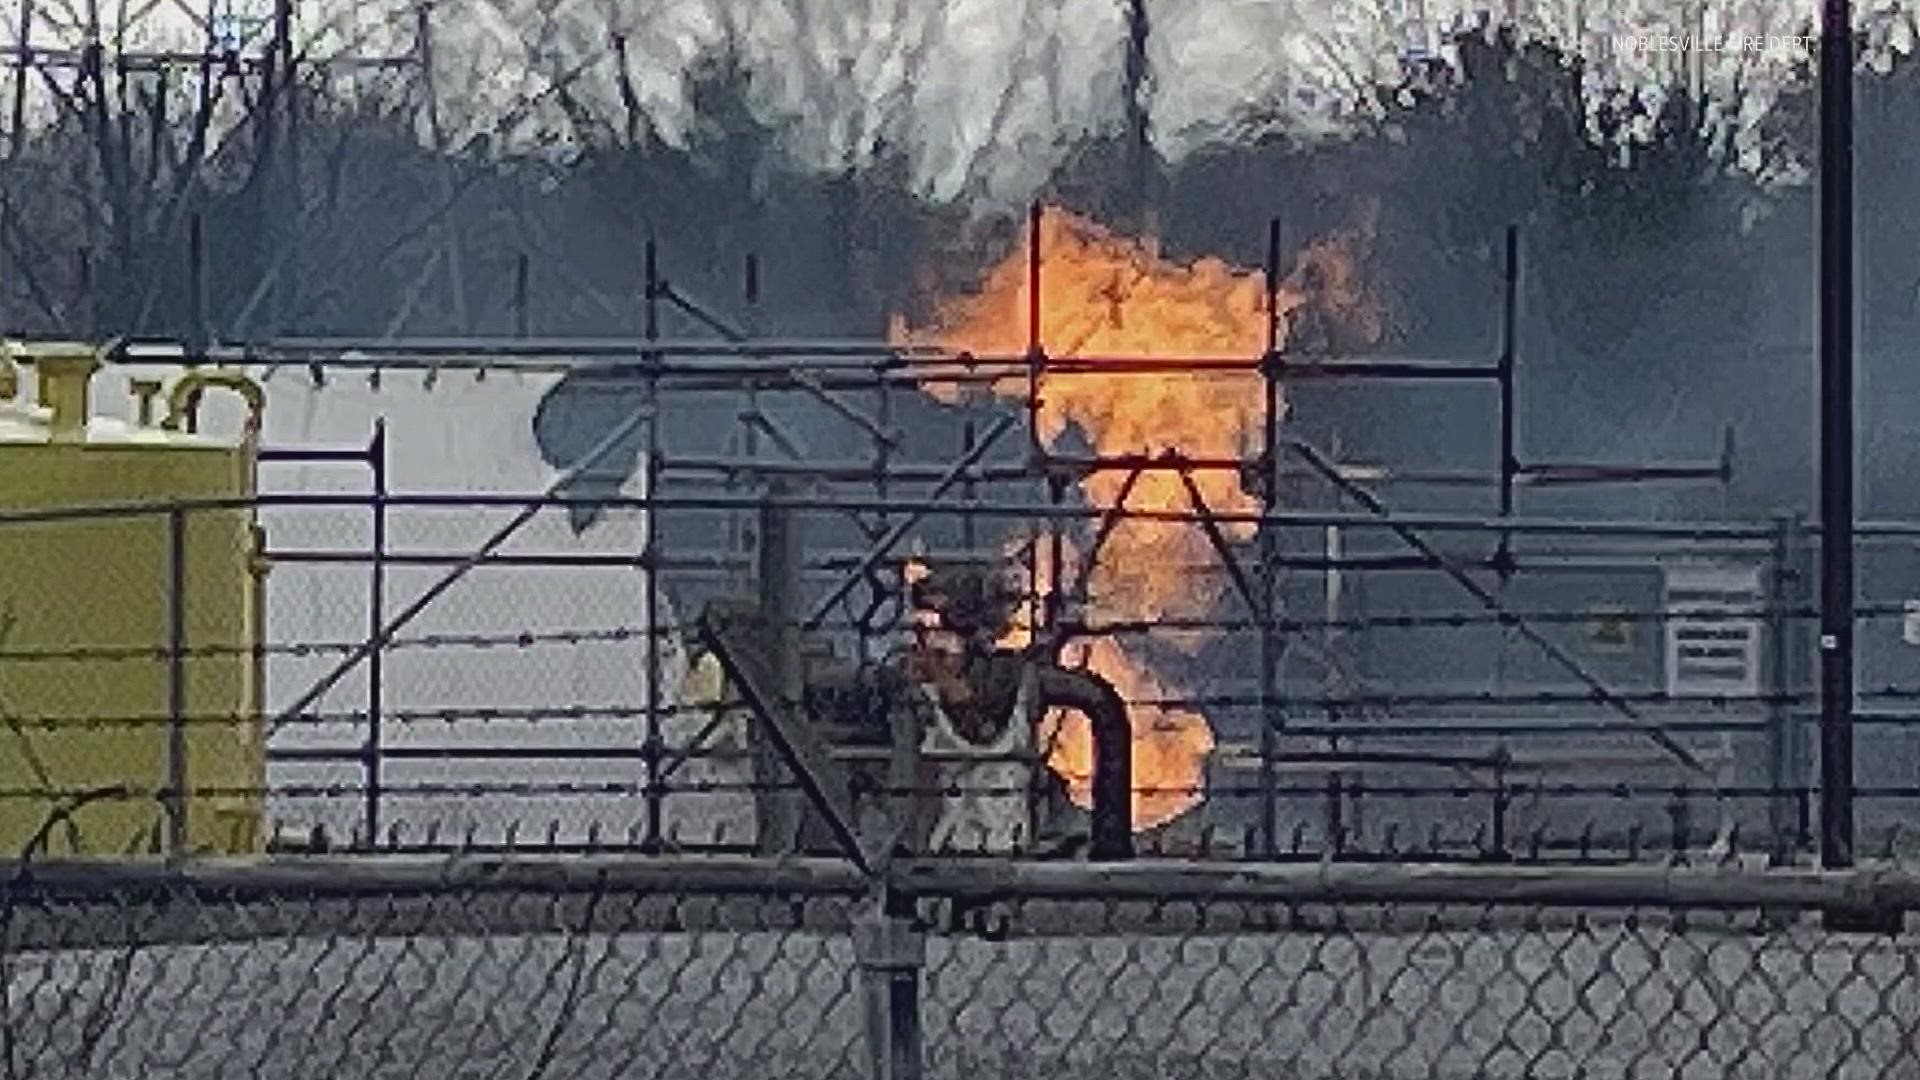 Duke Energy said it took the plant offline immediately after the fire to develop a repair plan for the natural gas yard where the fire occurred.